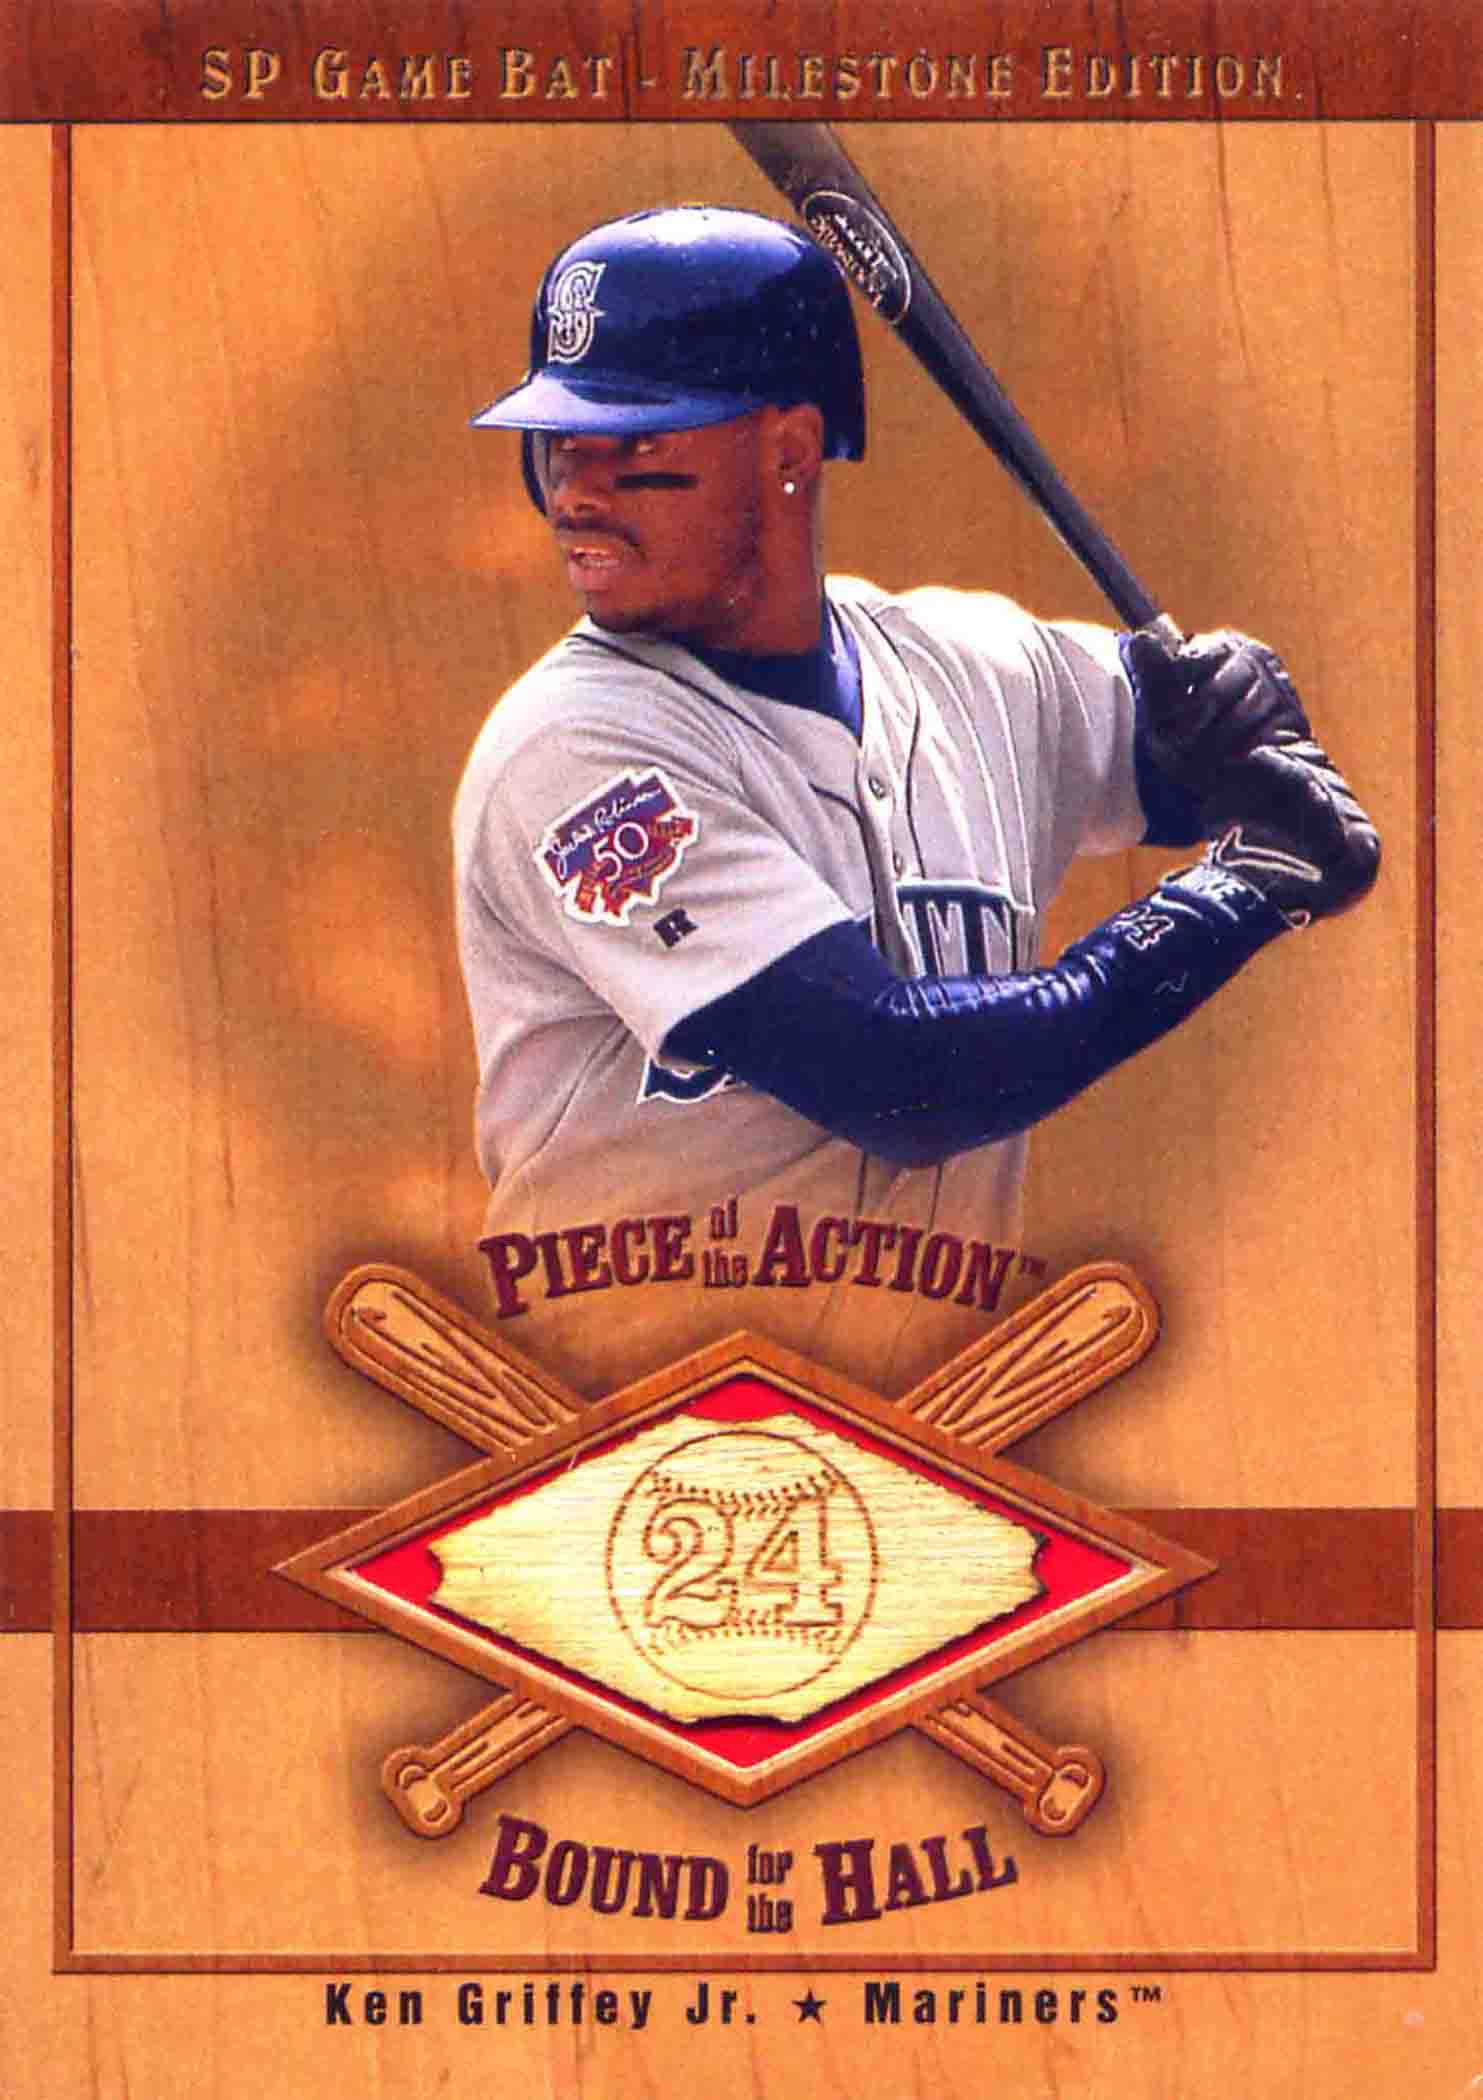 2001 SP Game Bat Milestone Piece of Action Bound for the Hall